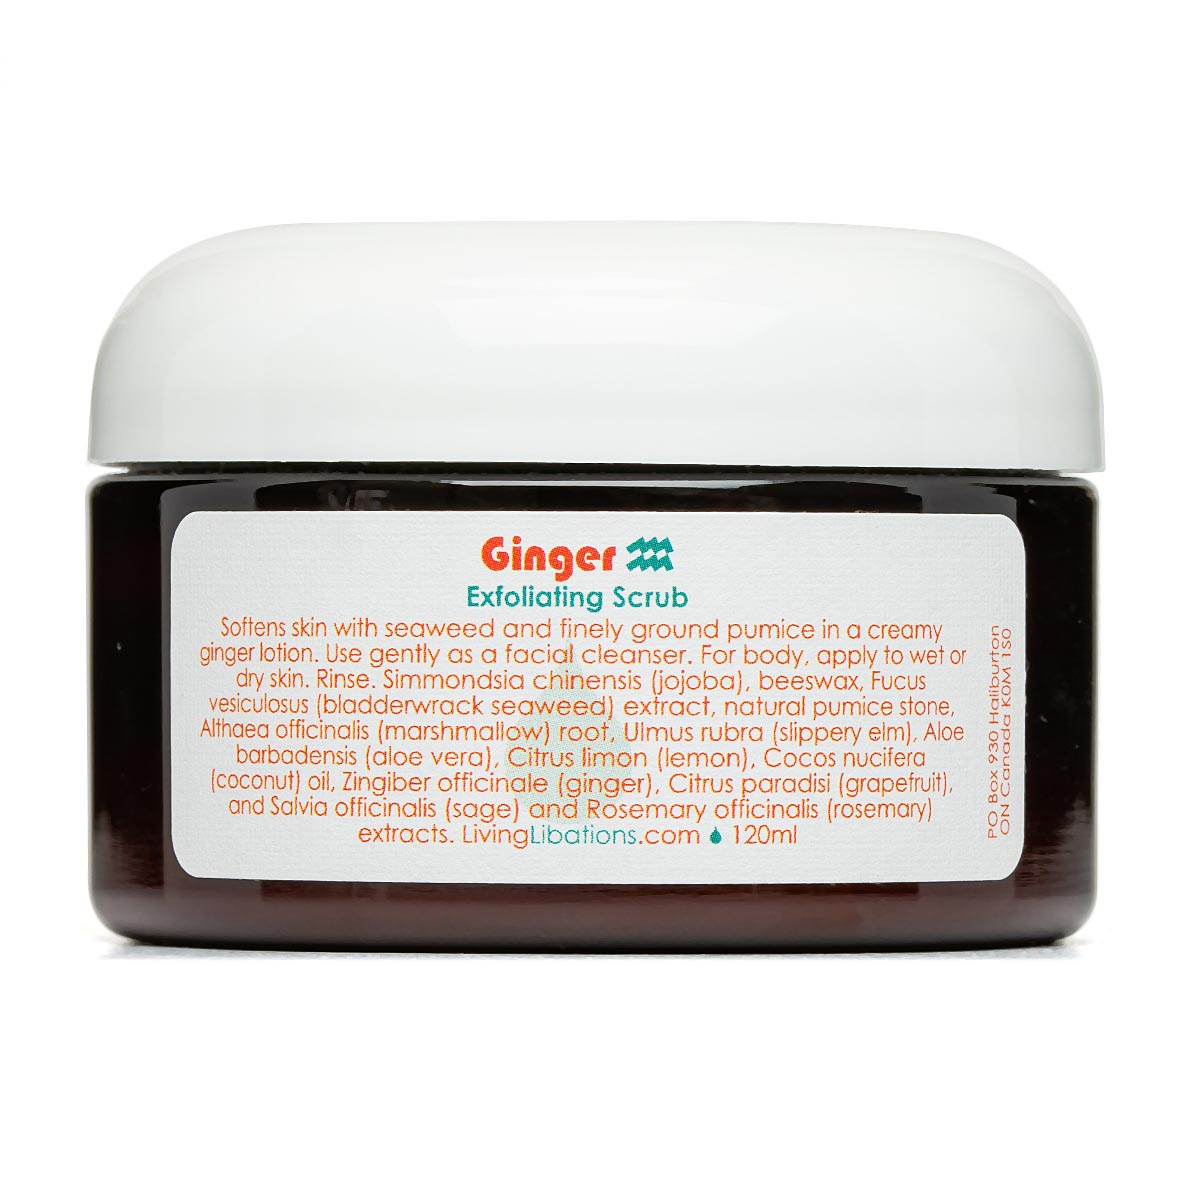 Ginger Exfoliating Scrub | Living Libations | Raw Living UK | Beauty | Skin Care | Living Libations Ginger Exfoliating Scrub (120ml) enlivens as it exfoliates from head to toe, leaving skin infused with the softening magic of Seaweed &amp; Pumice.